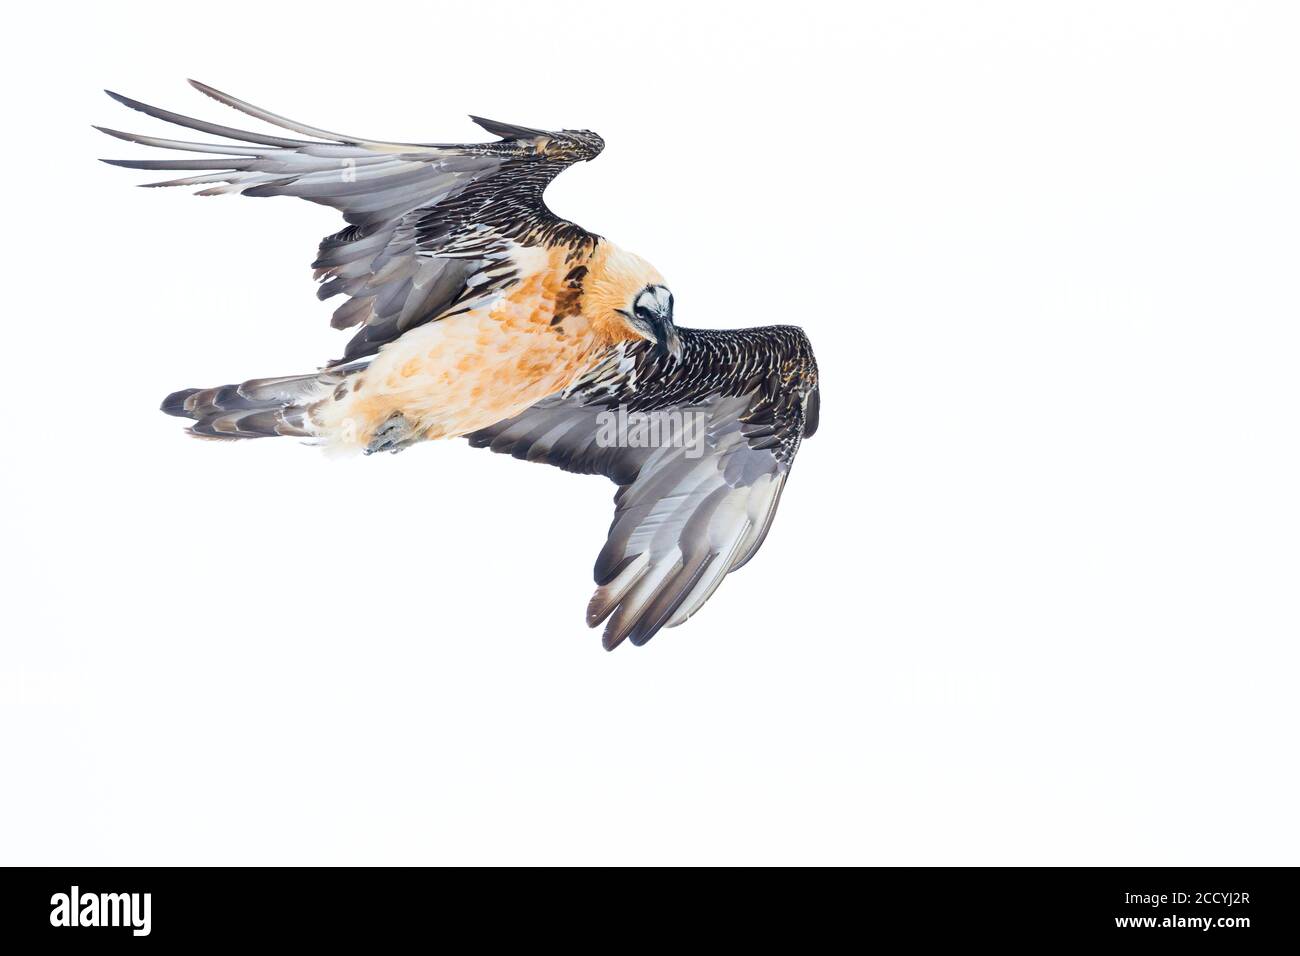 Adult Bearded Vulture (Gypaetus barbatus barbatus), in flight over snow-covered Alps in Switzerland. Also known as Lammergeier. Stock Photo